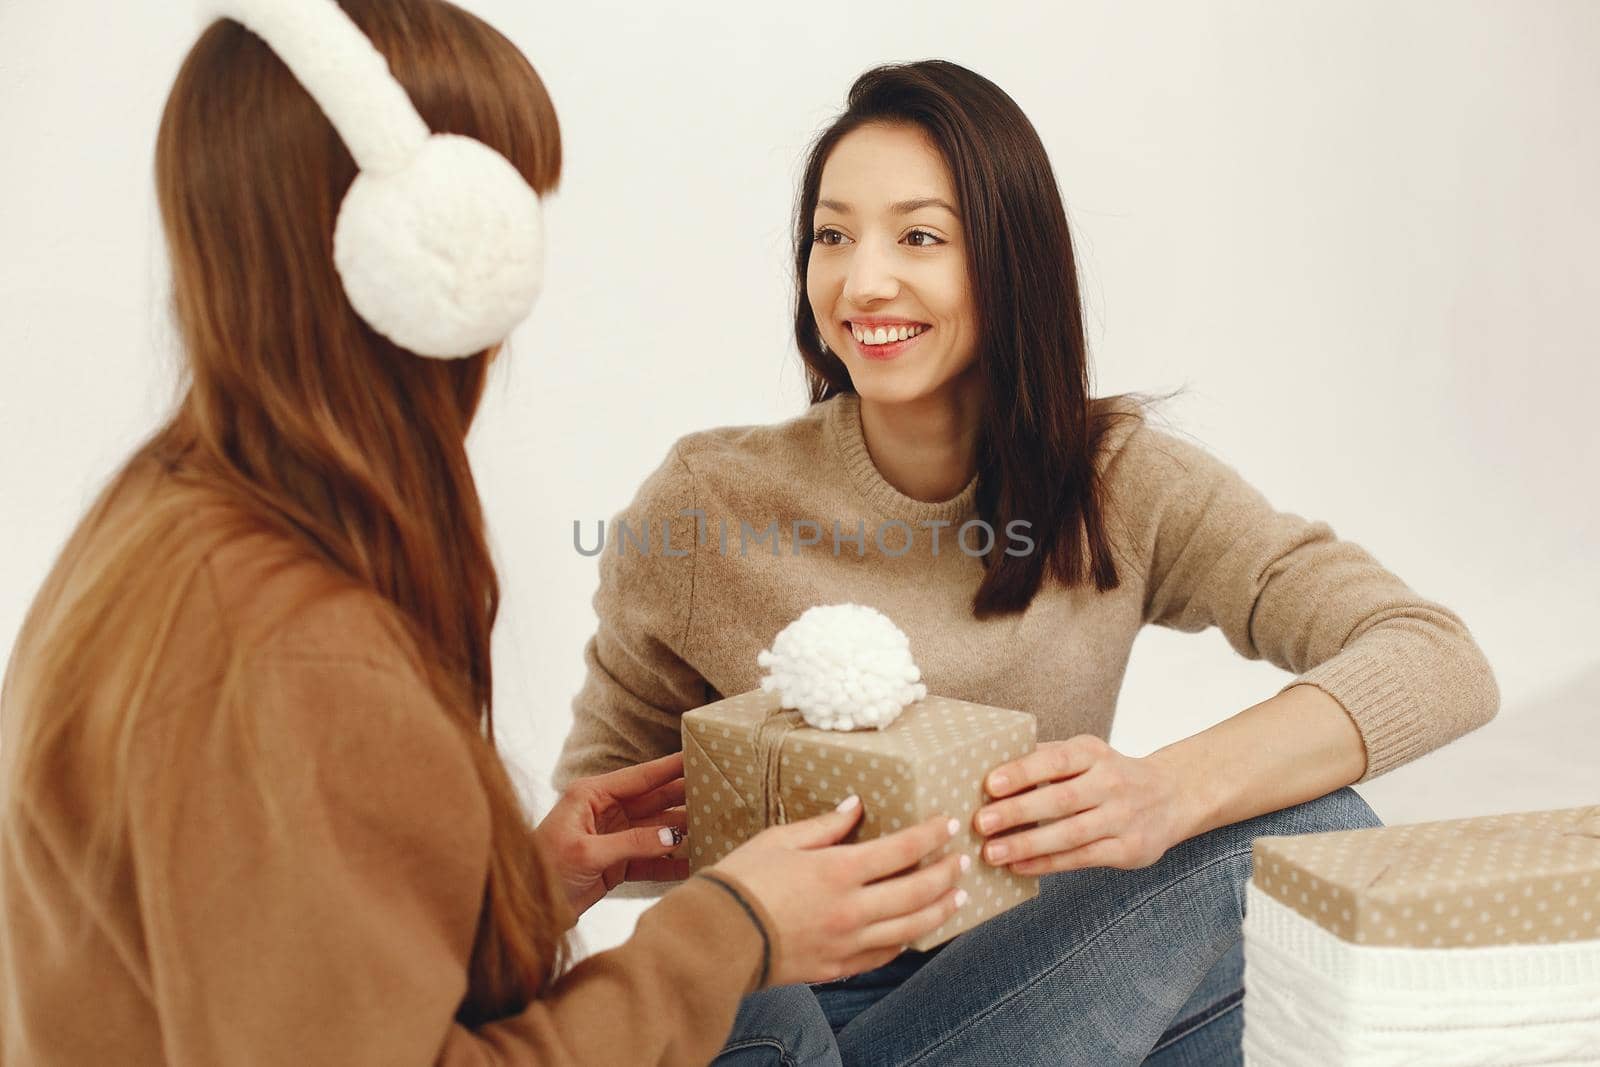 Women with presents. Girls in a brown sweater. Ladies in a studio.